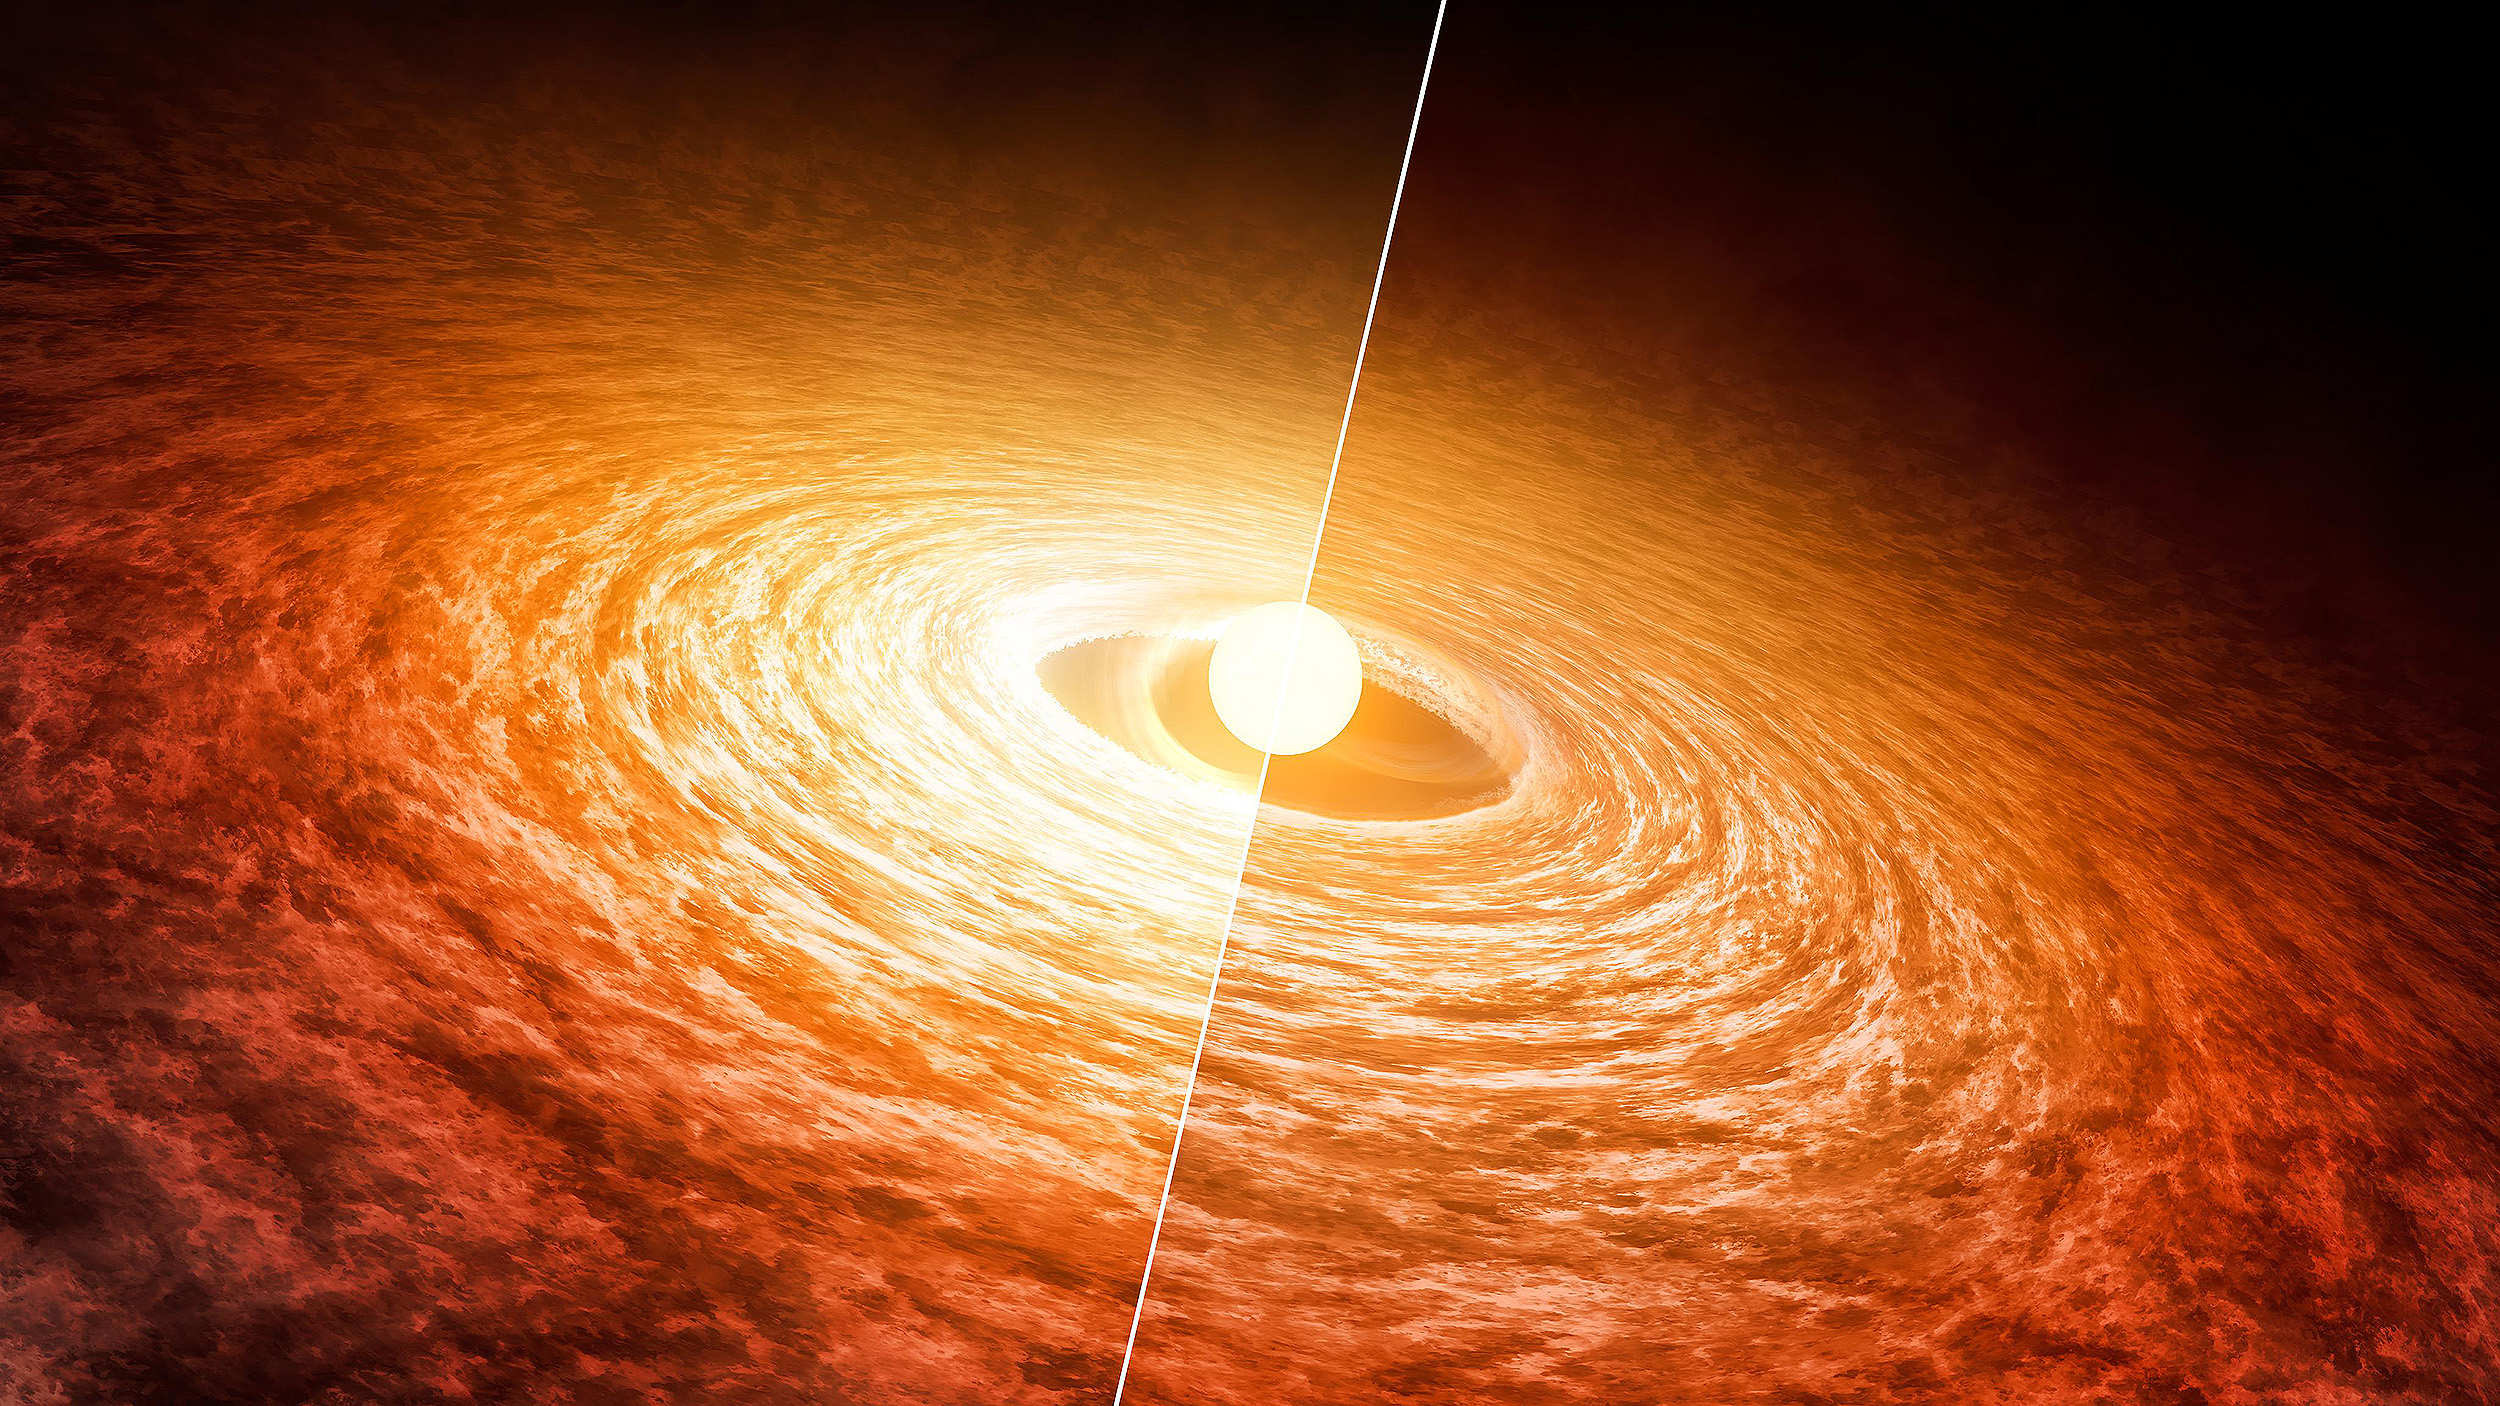 A computer-generated image of a bright celestial object with an accretion disk, possibly representing what the sun looked like when it was born.